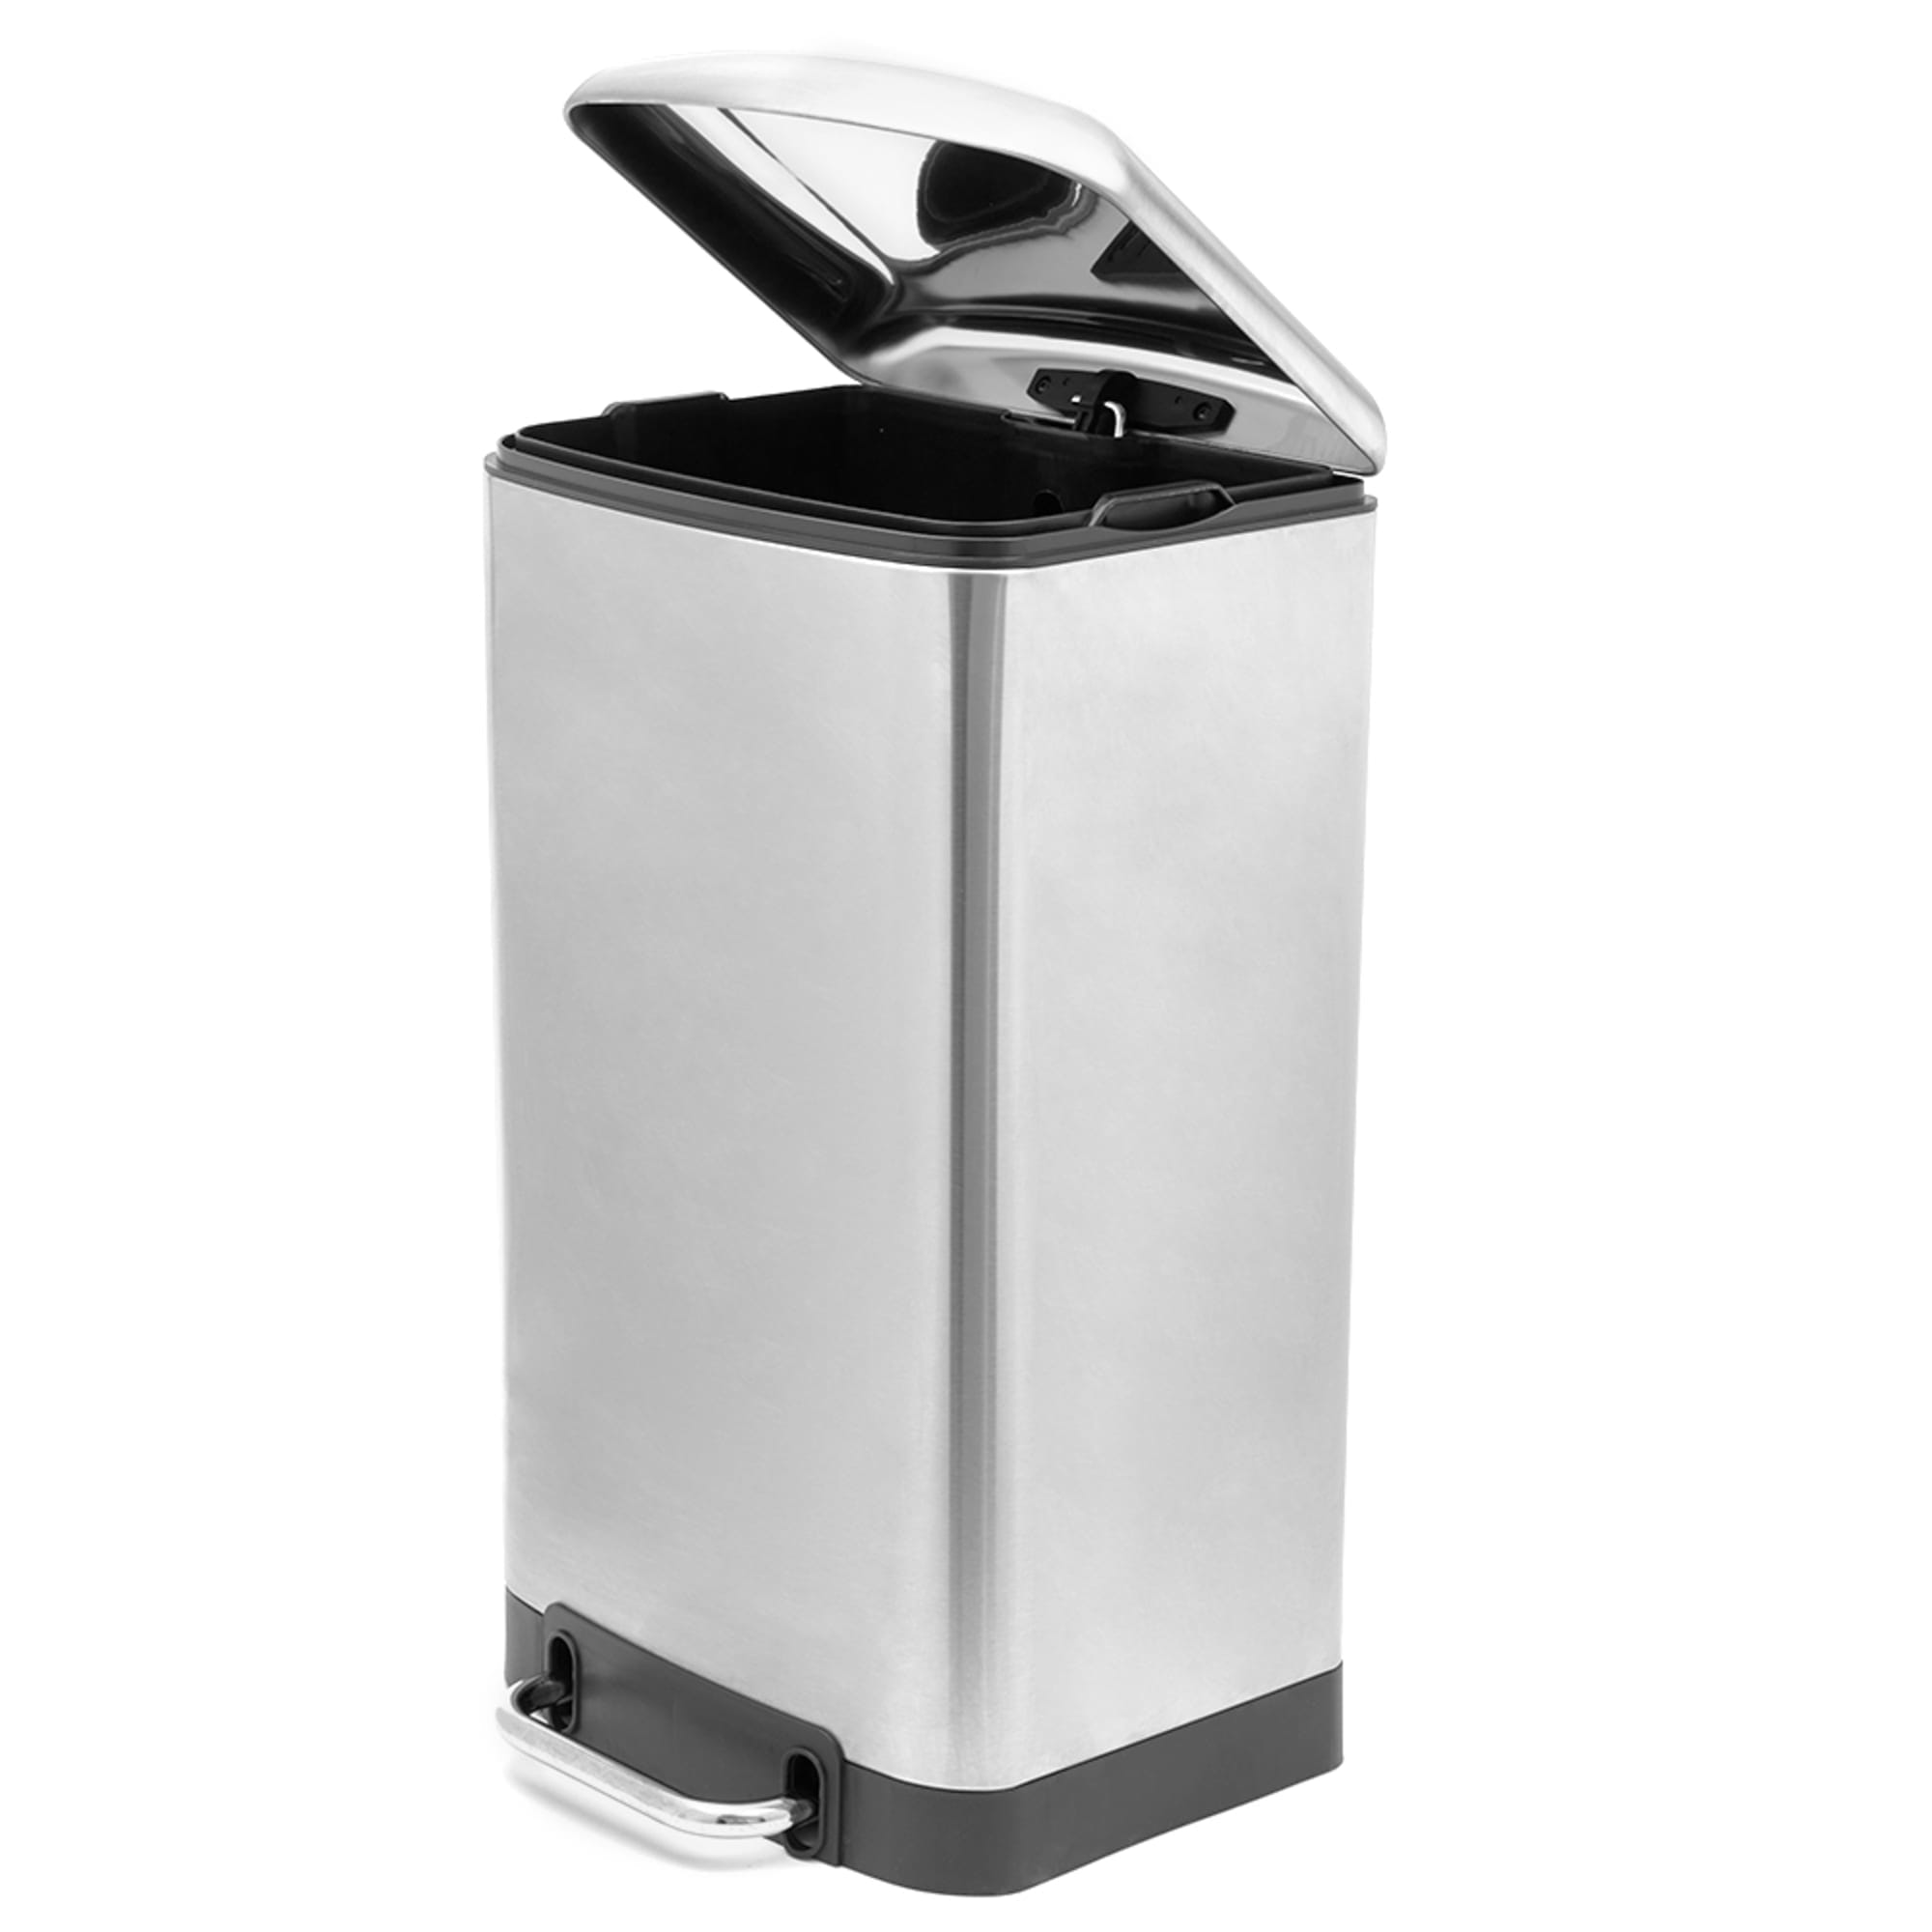 Michael Graves Design Soft Close 30 Liter Step On Stainless Steel Waste Bin, Silver $50.00 EACH, CASE PACK OF 1